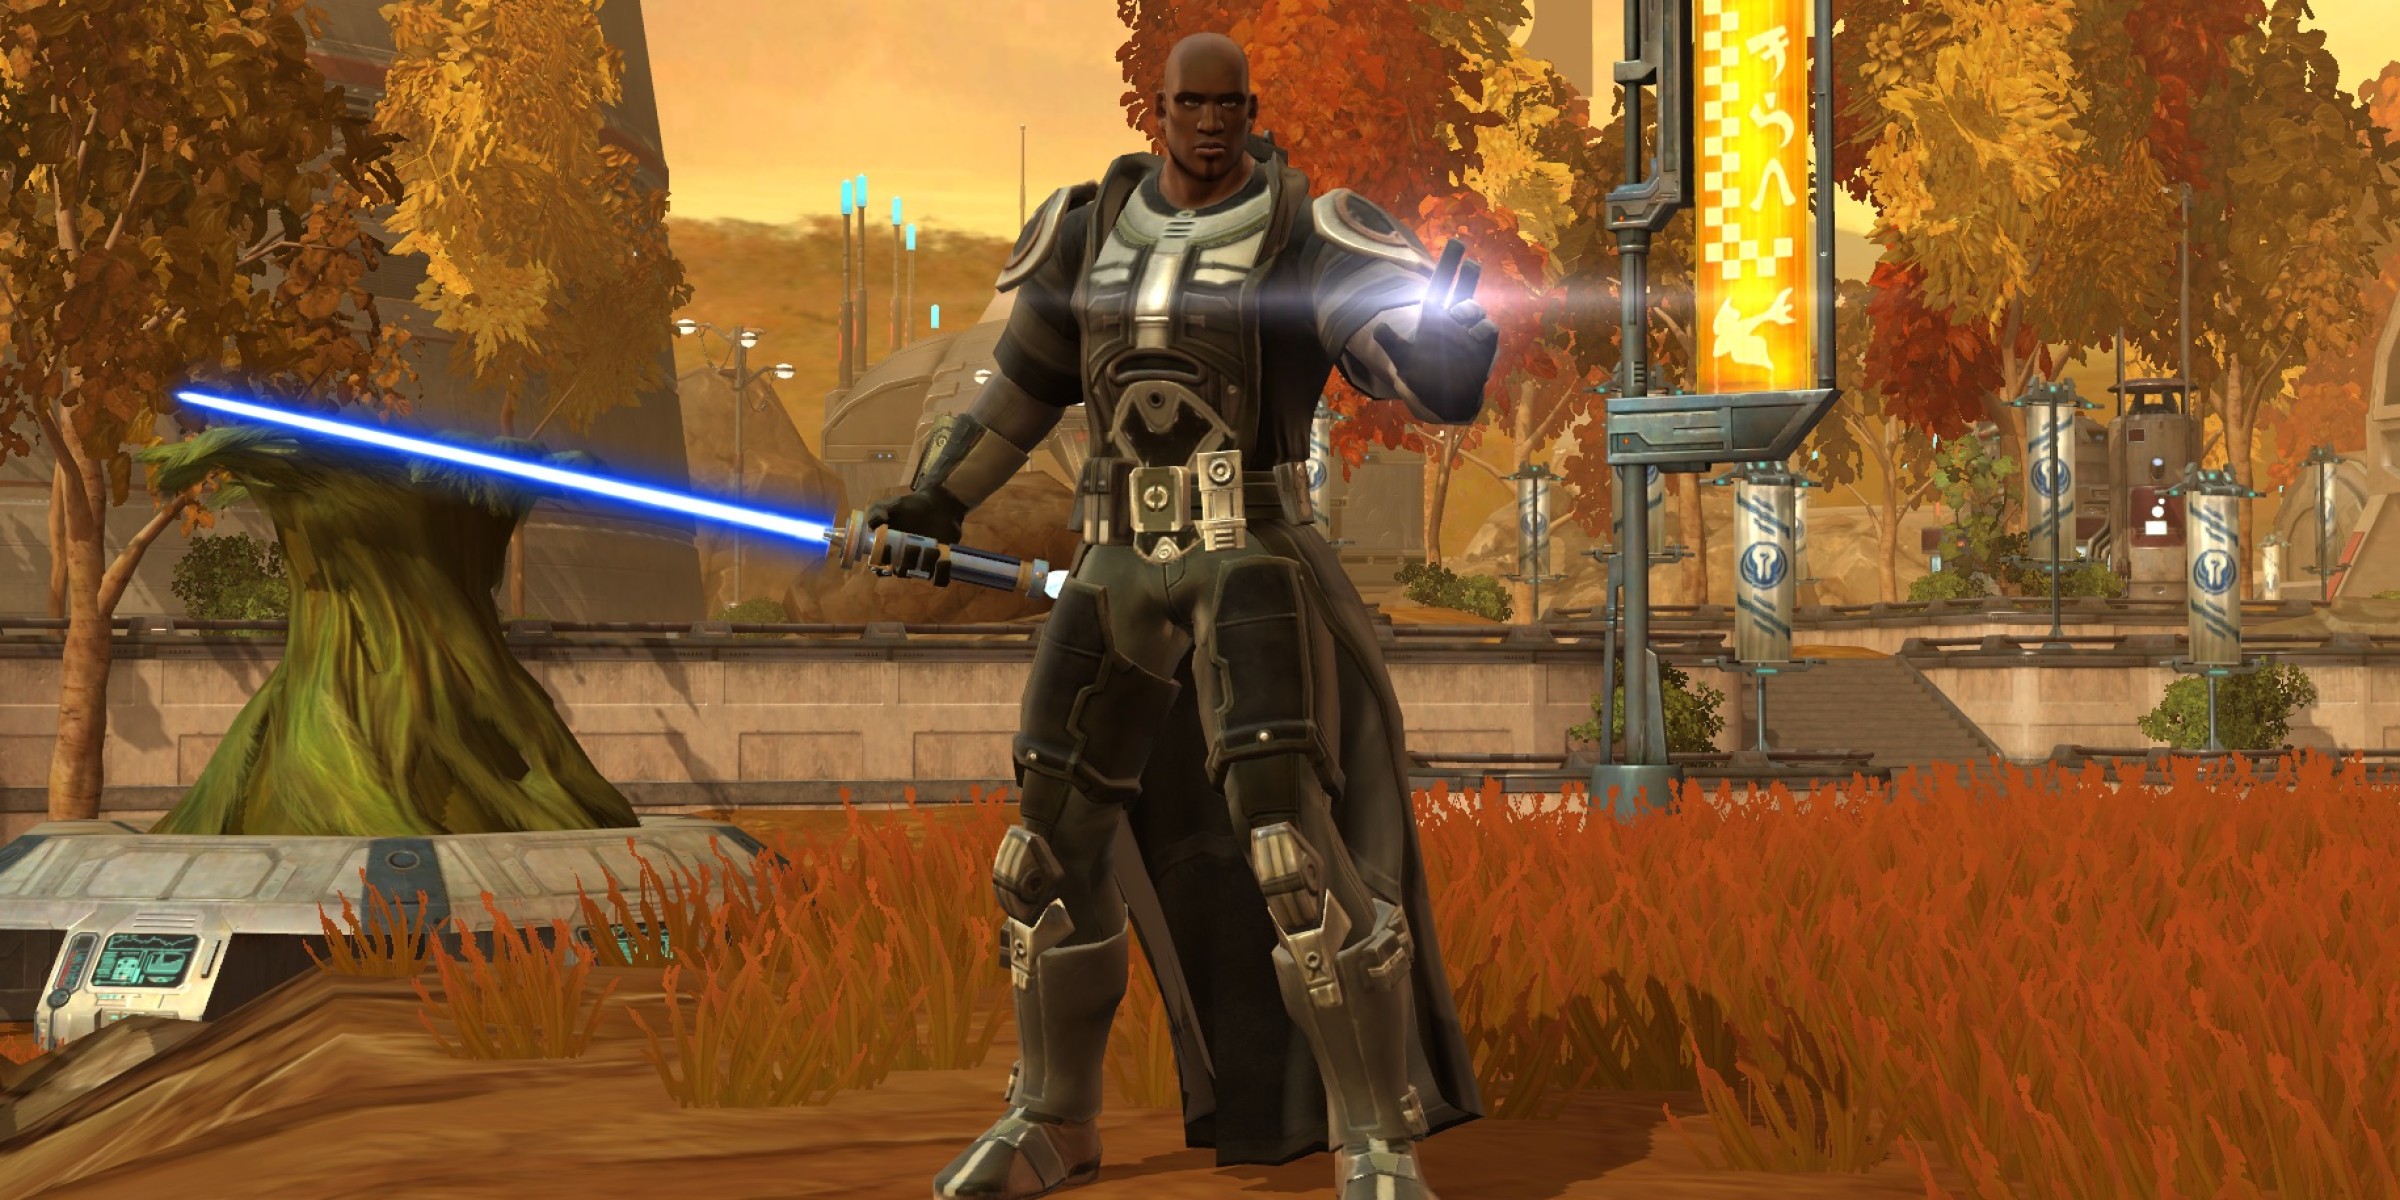 Star Wars: The Old Republic #19